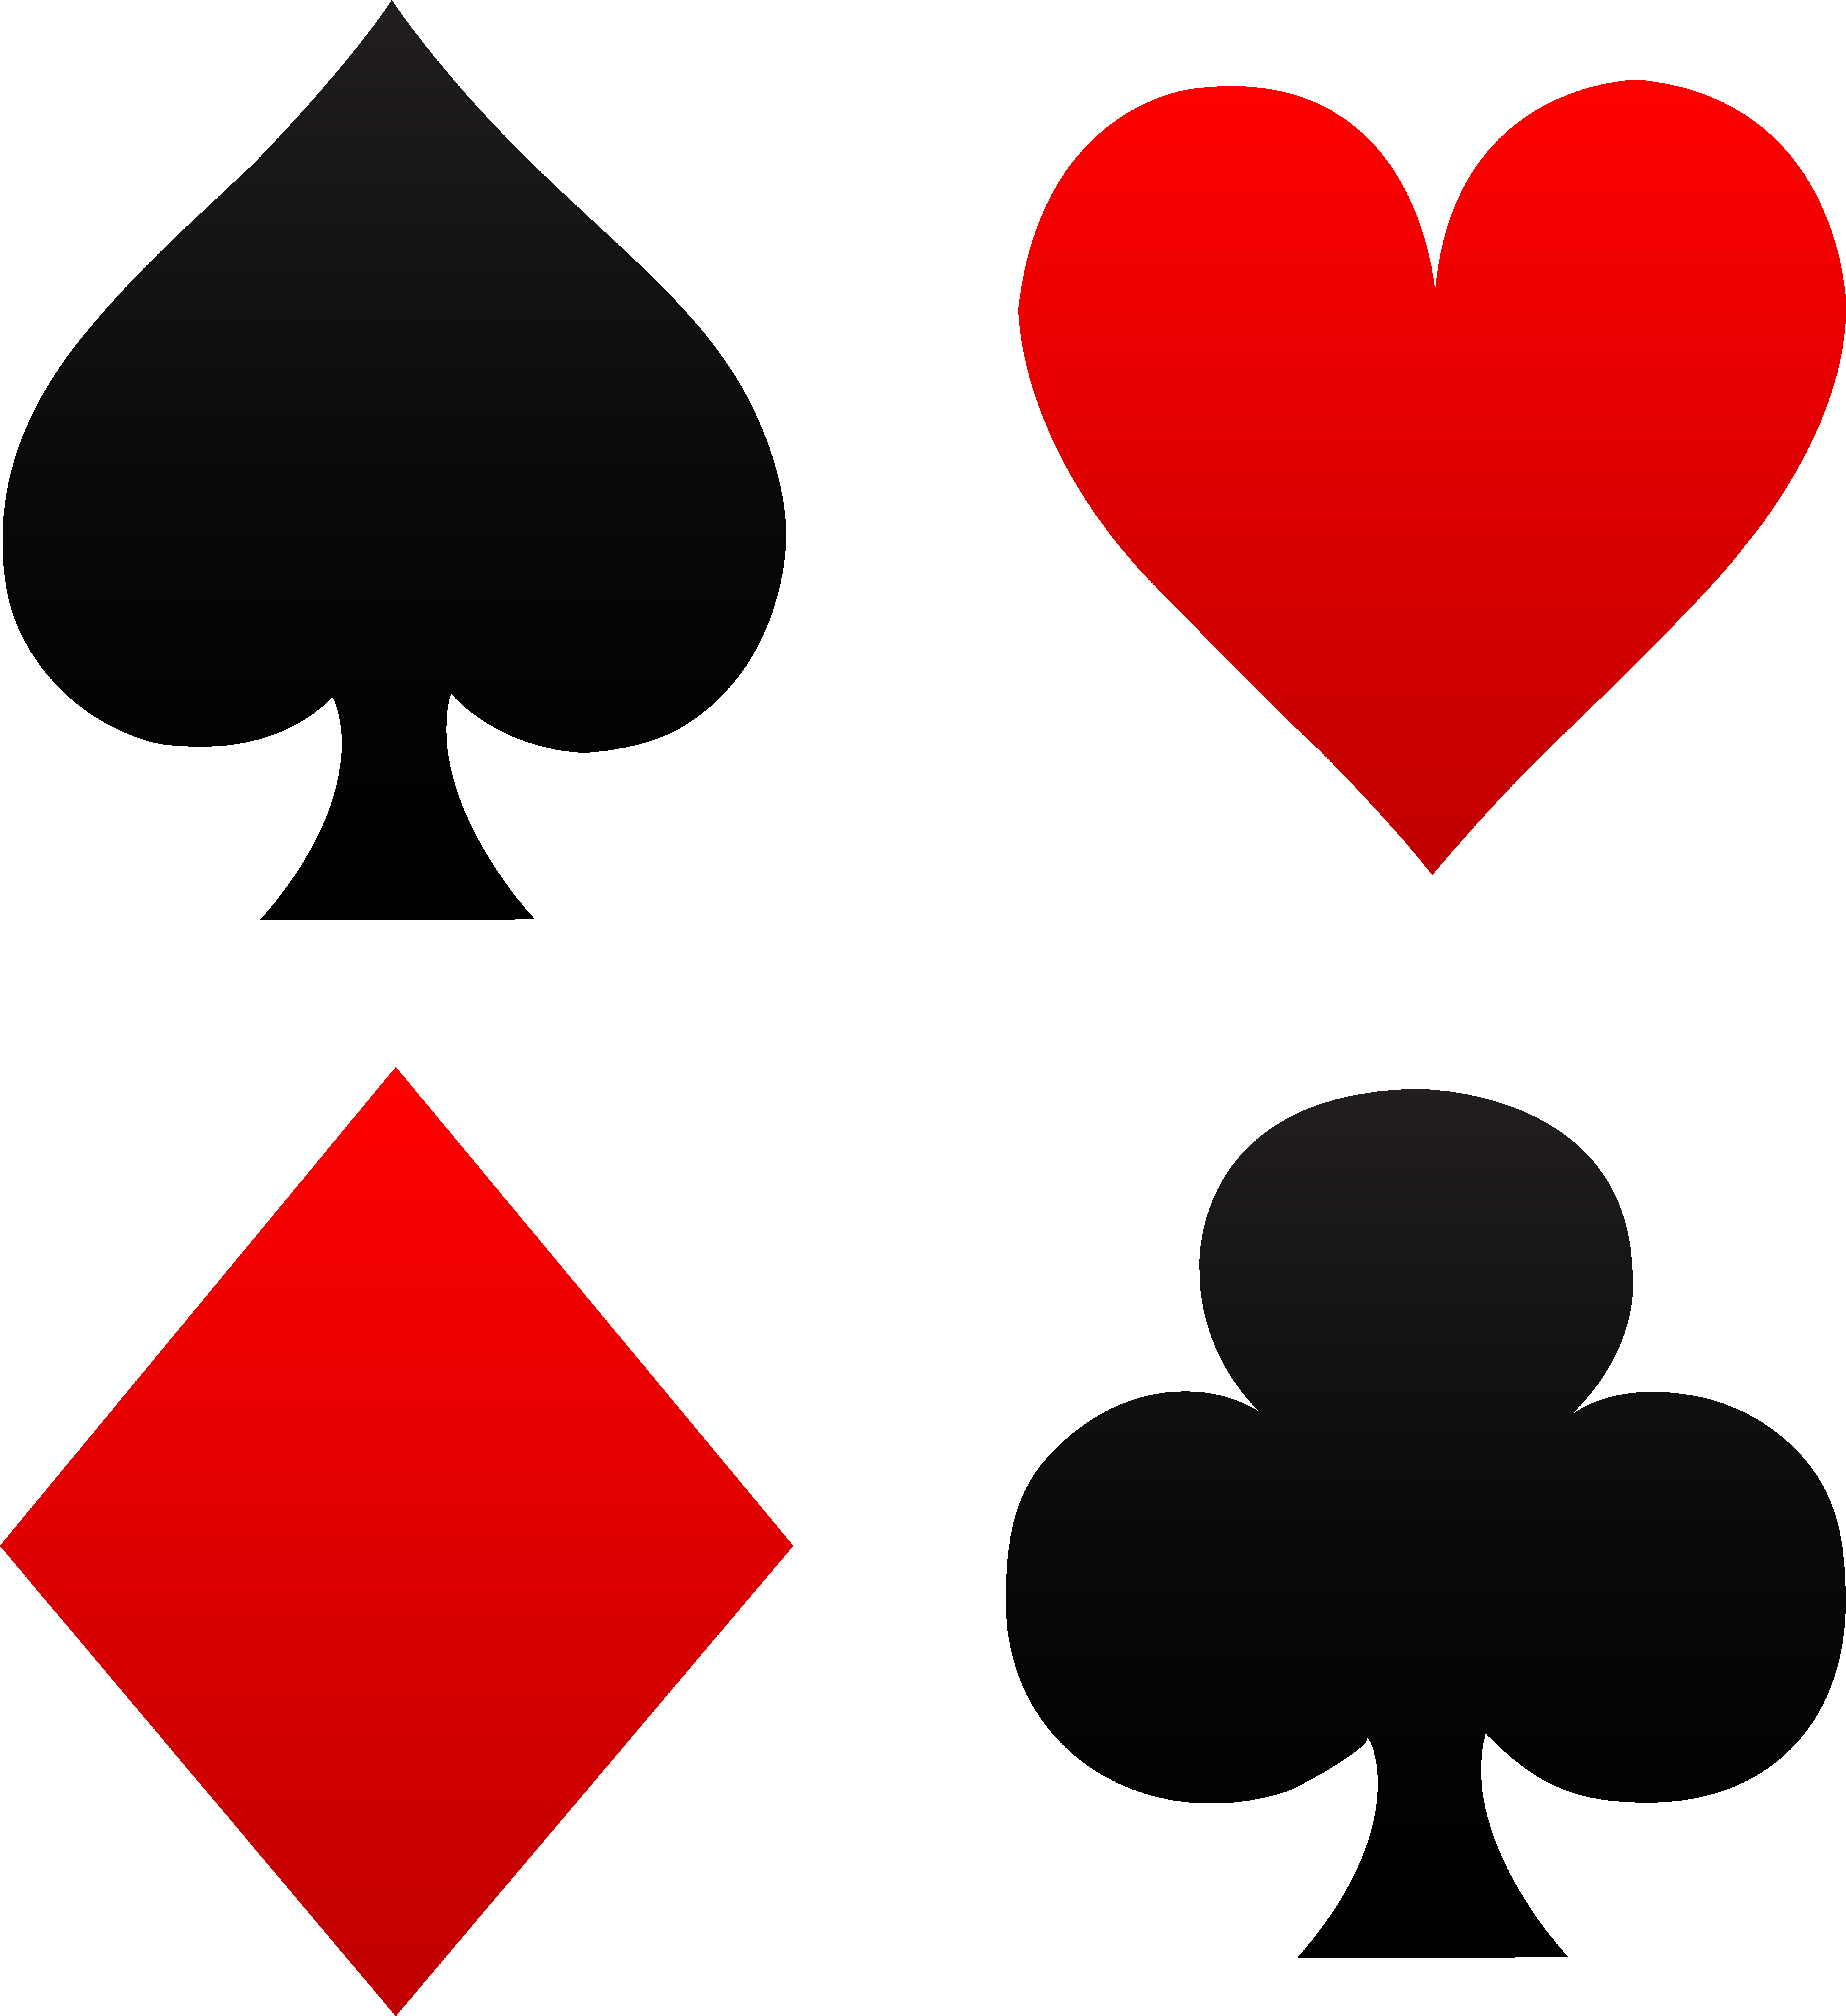 Free Images Of Playing Cards, Download Free Clip Art, Free.